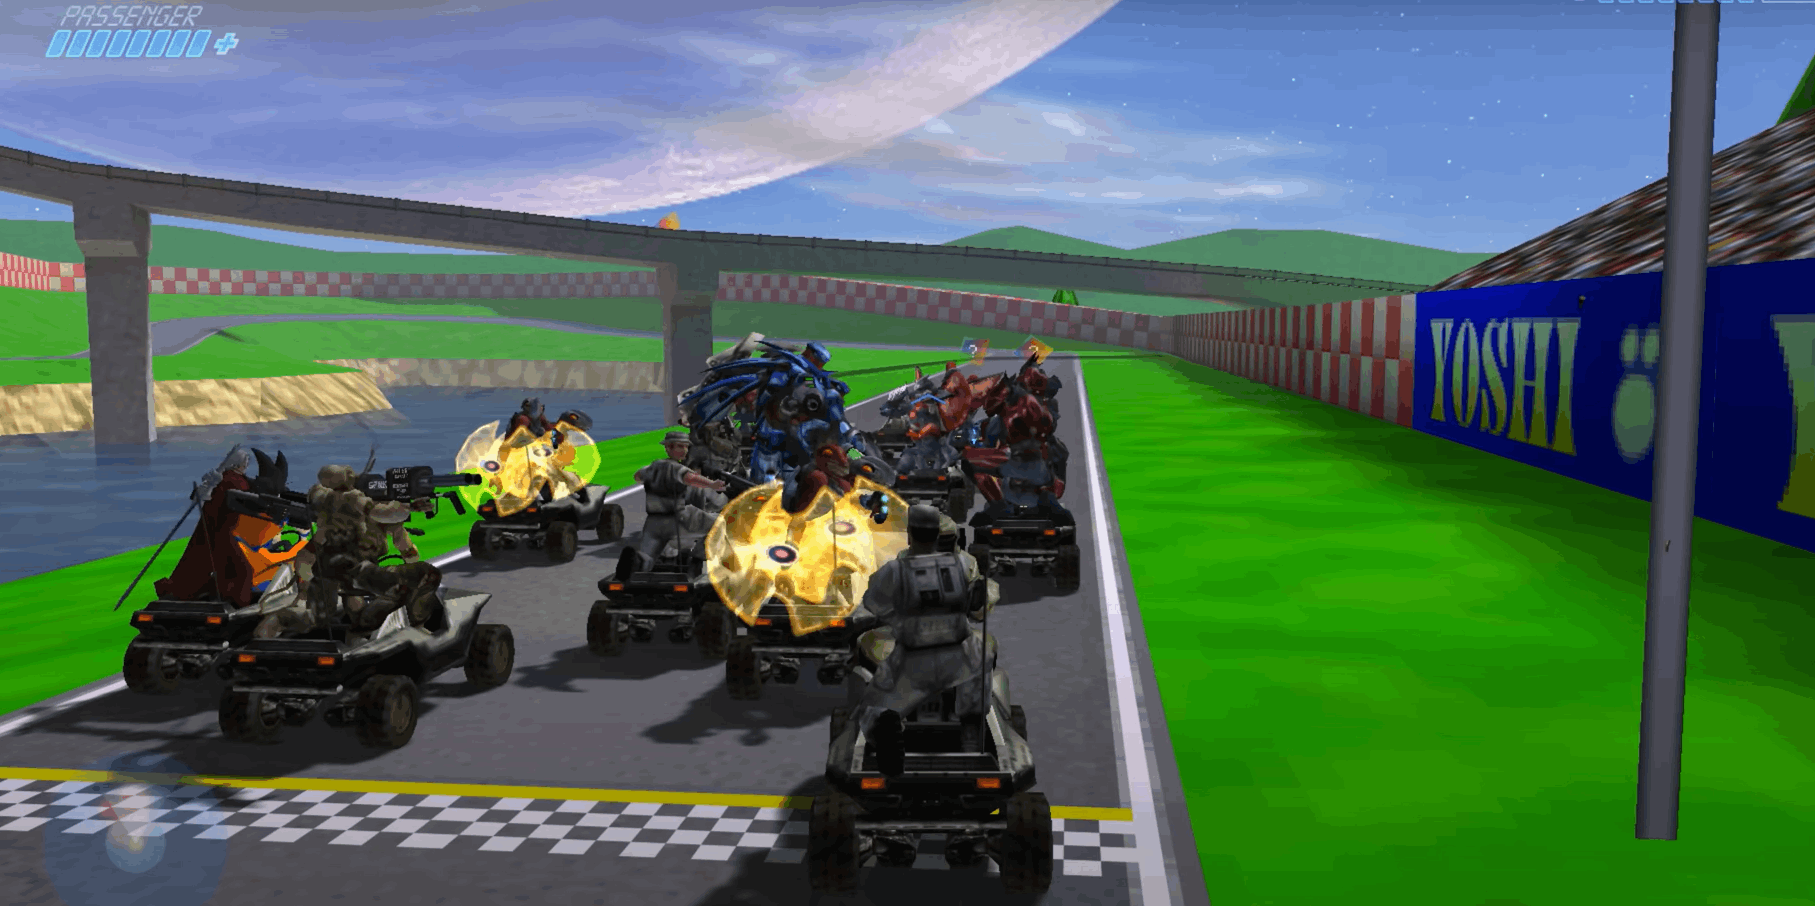 The mod integrates the creator's older Mario Kart mod into the game.